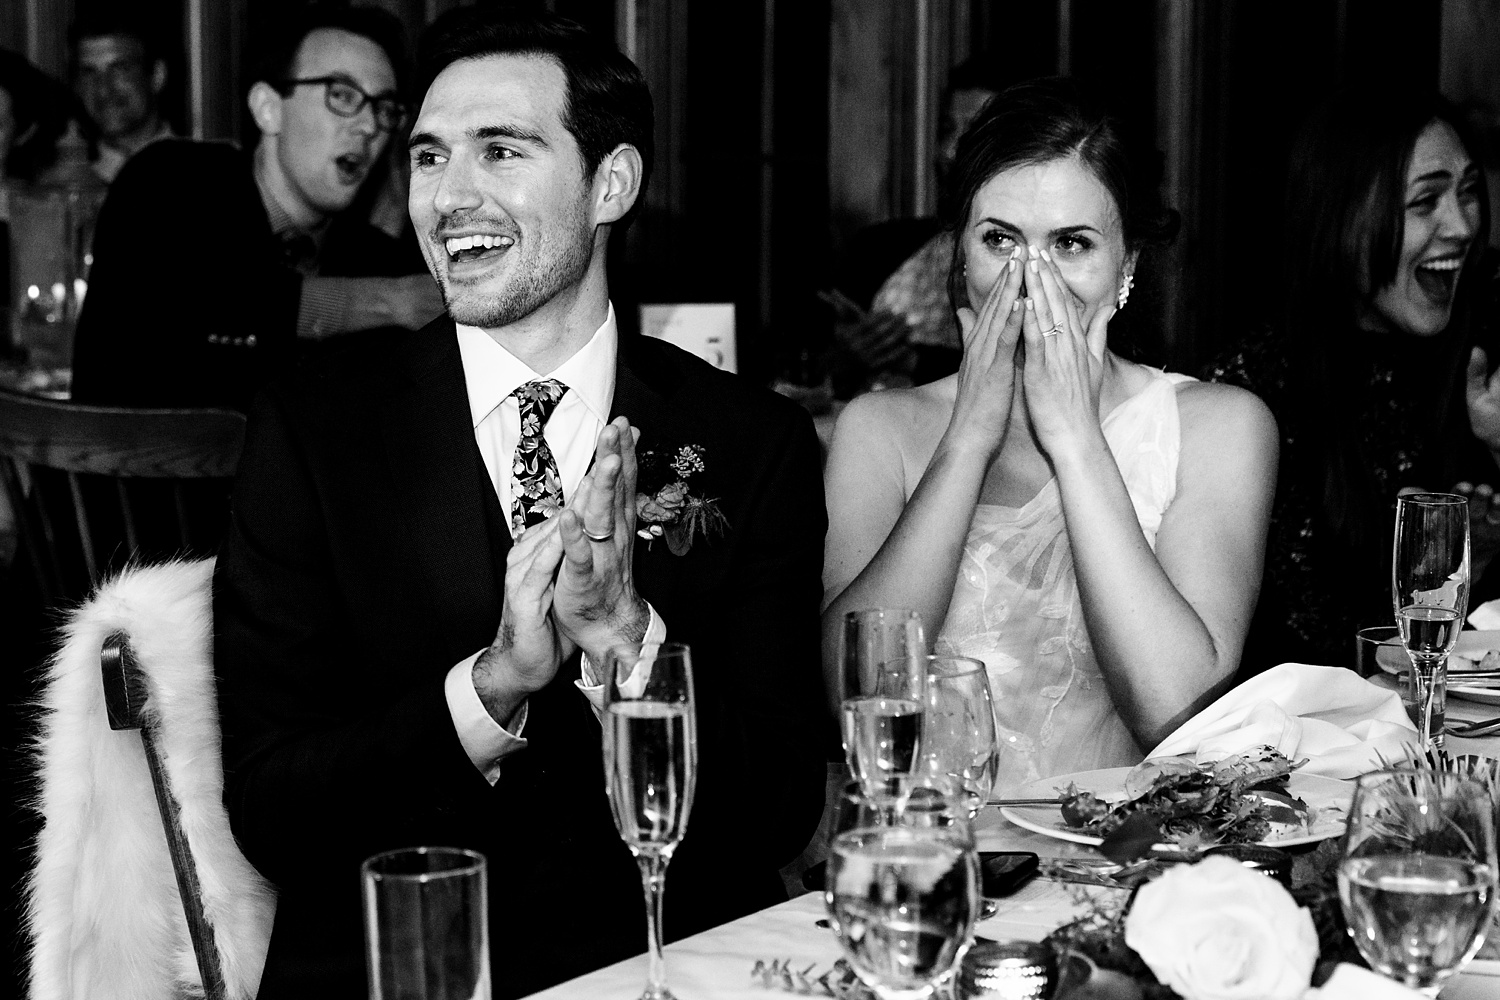 The bride and groom tear up at the toasts during the wedding reception in Maine